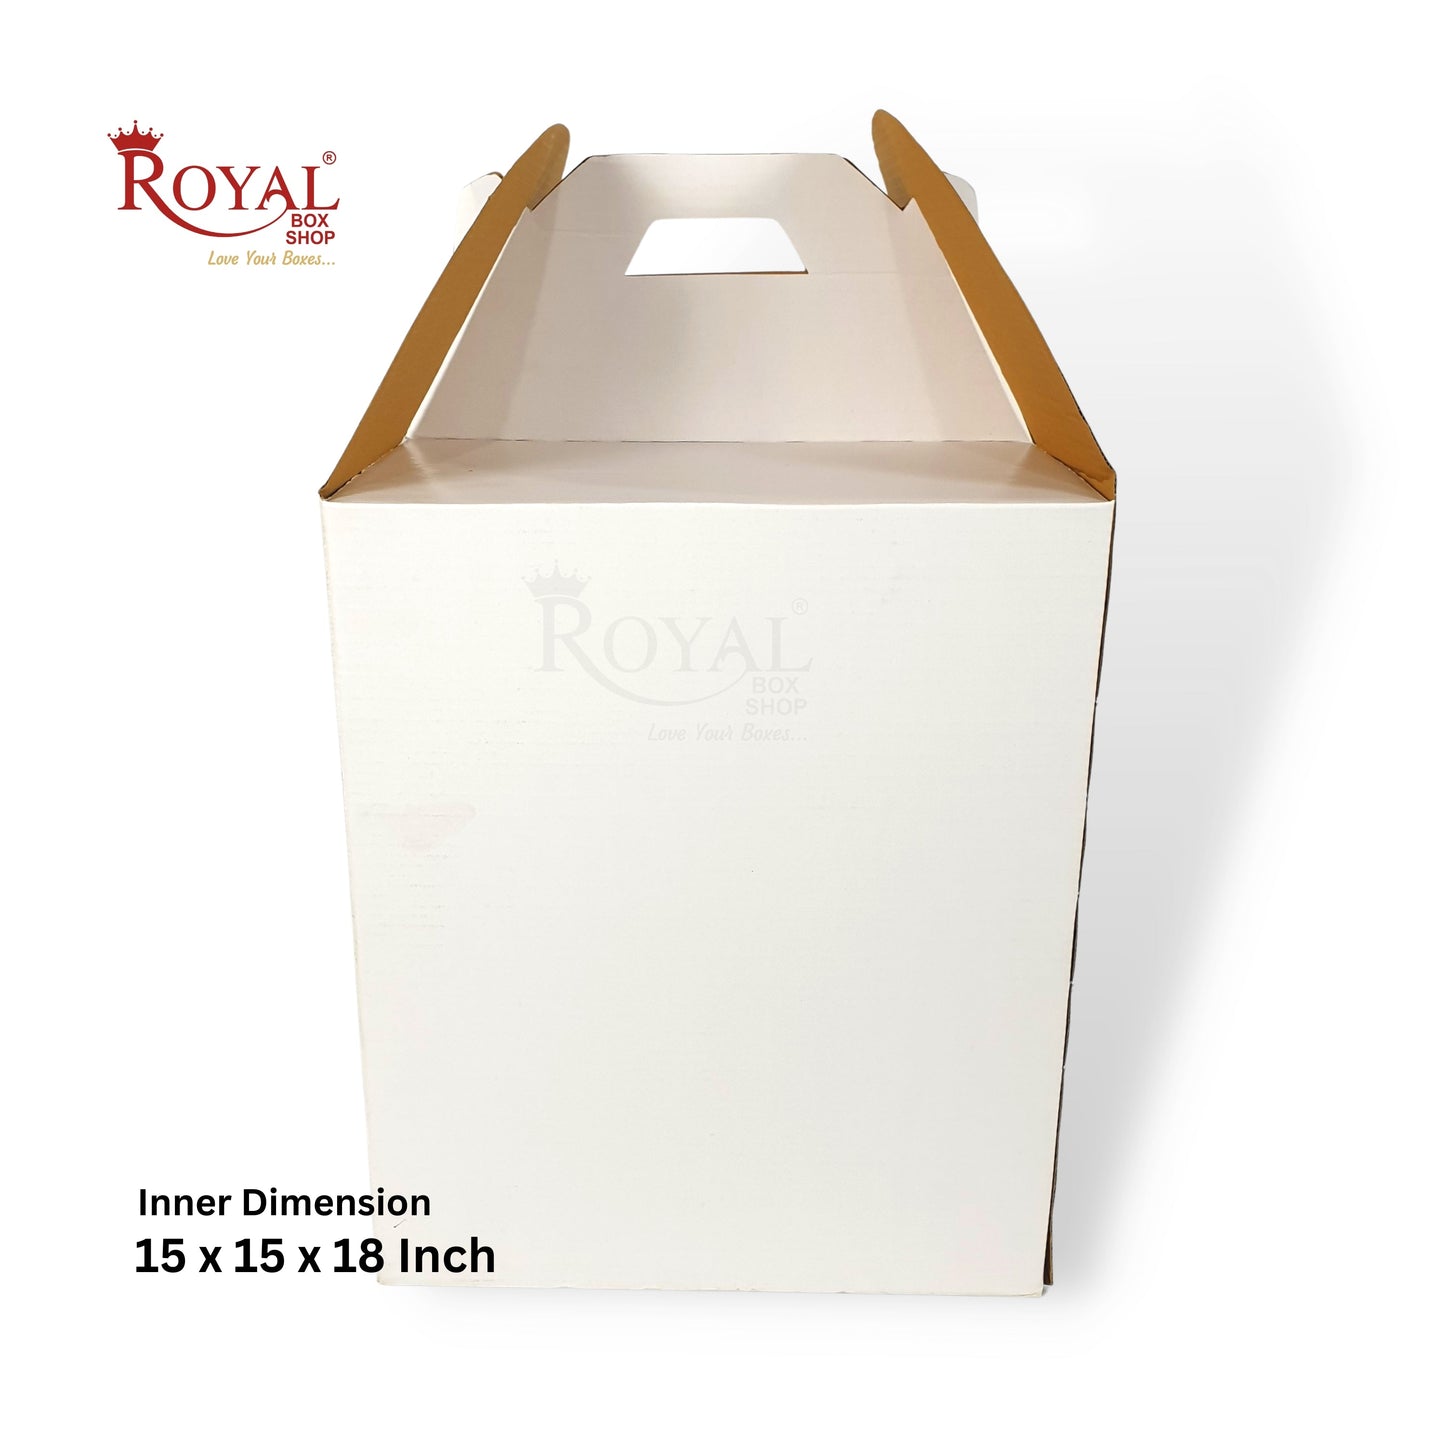 Corrugated Tall Cake Box with Handle I Exquisite White I 15x15x18 Inch I Perfect for Birthdays Cake Packaging Royal Box Shop